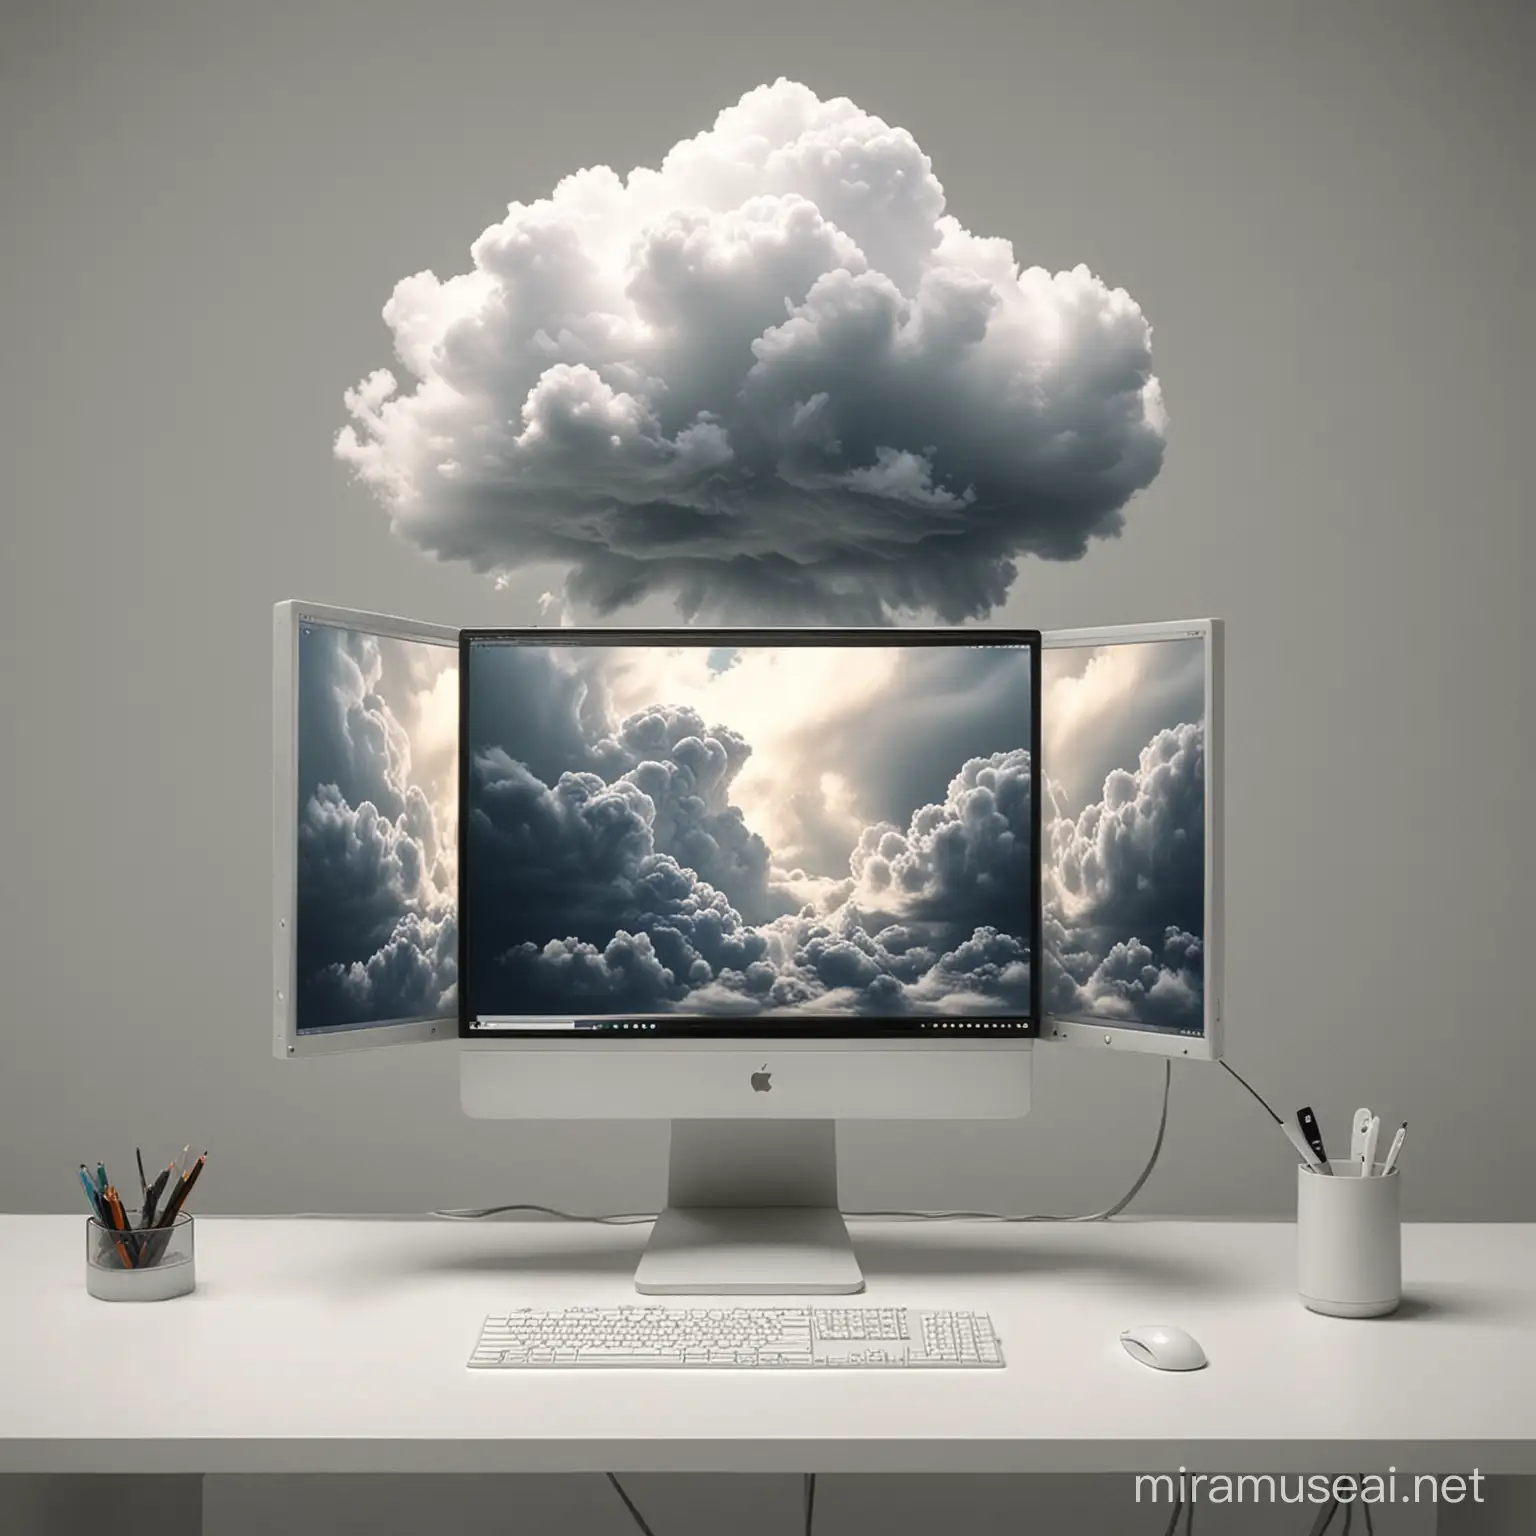 Modern PC Concept with Explosive Clouds